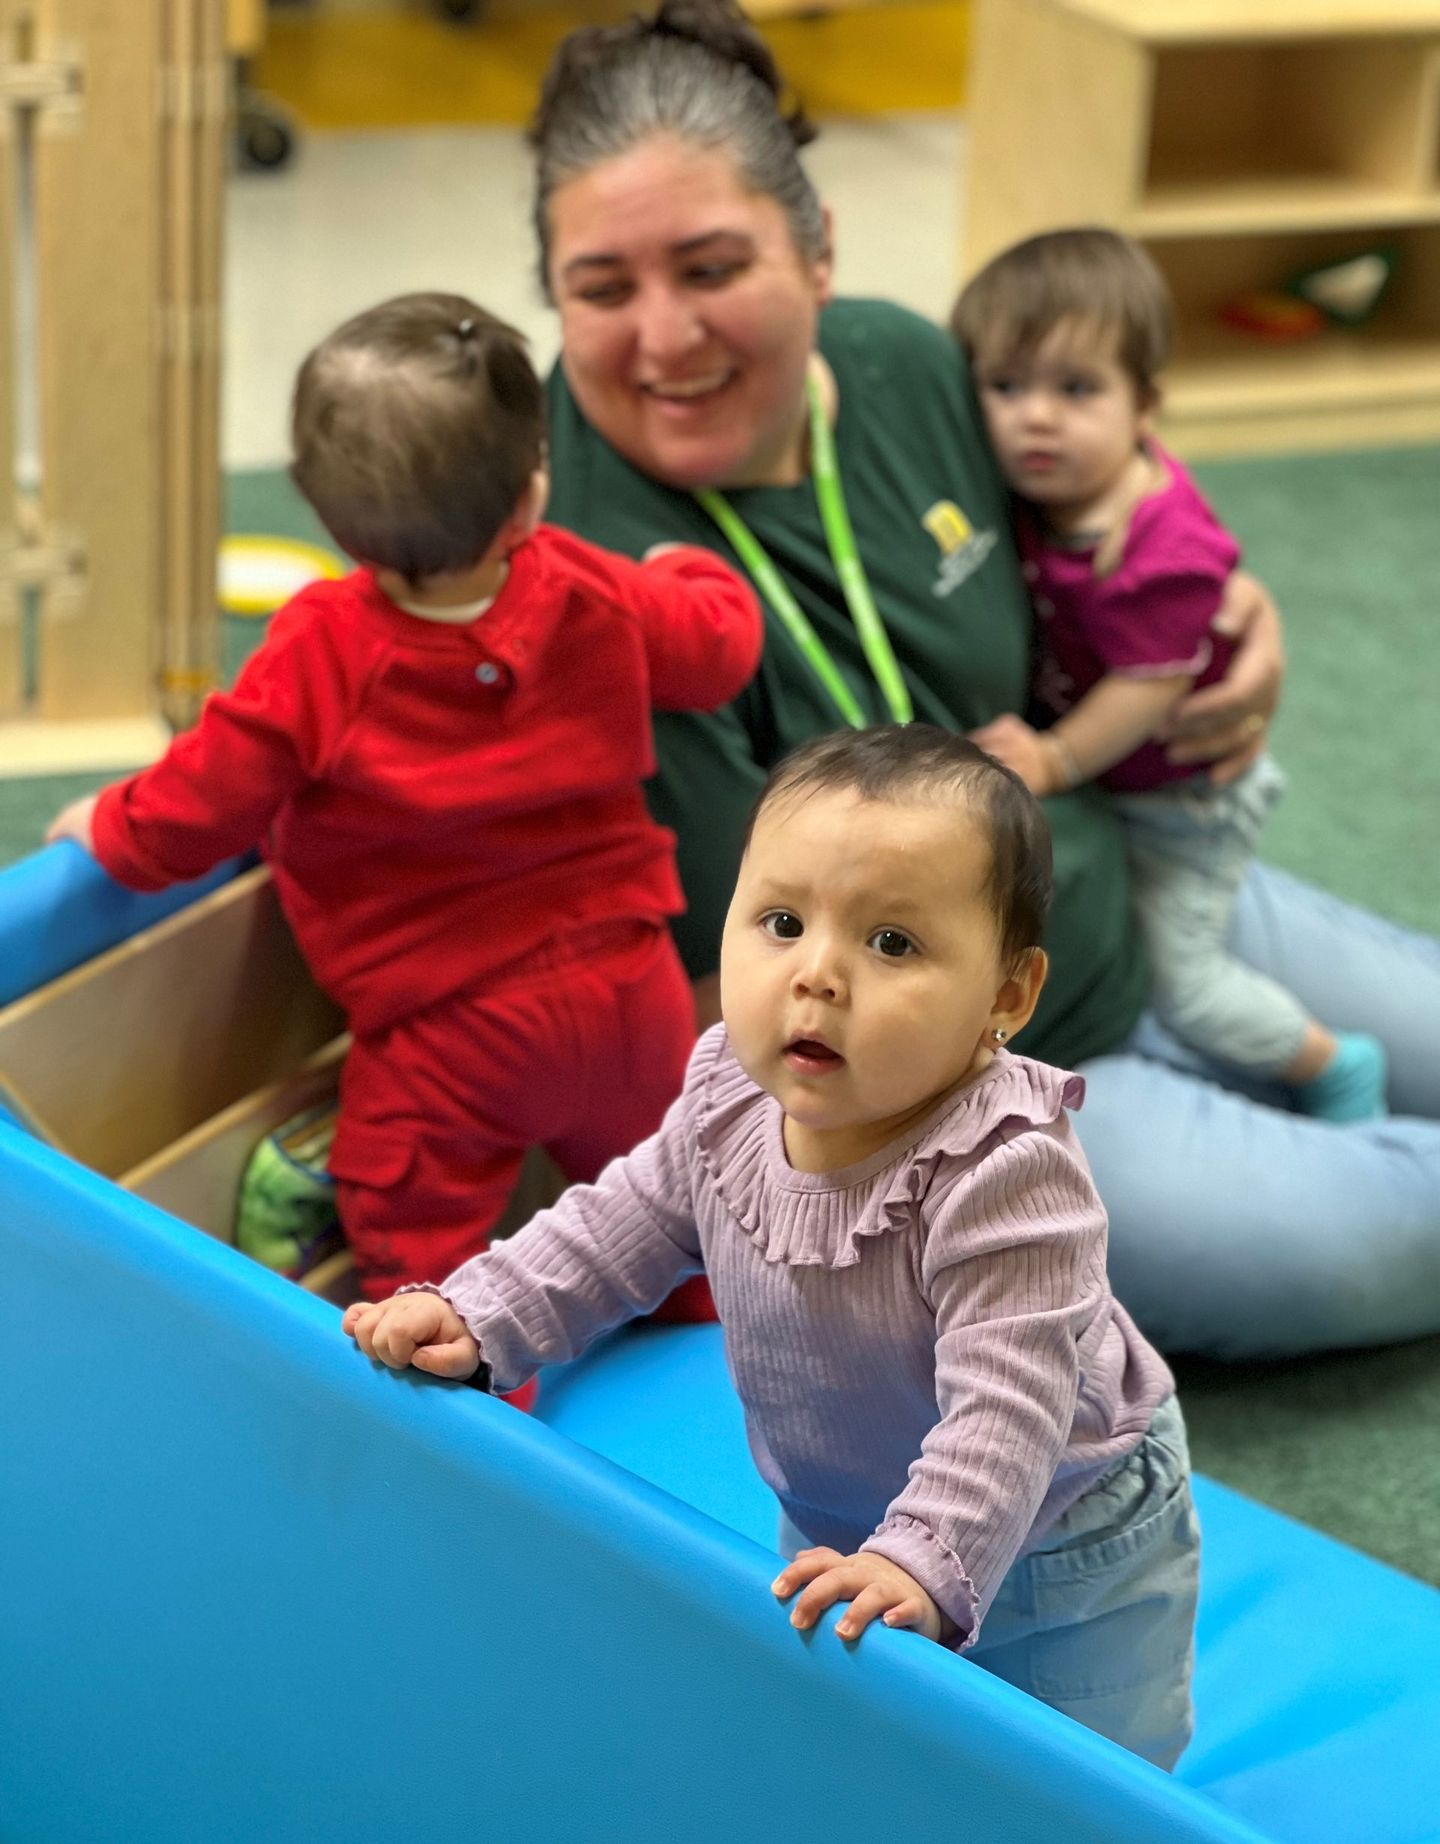 a woman is playing with three babies in a play room .
